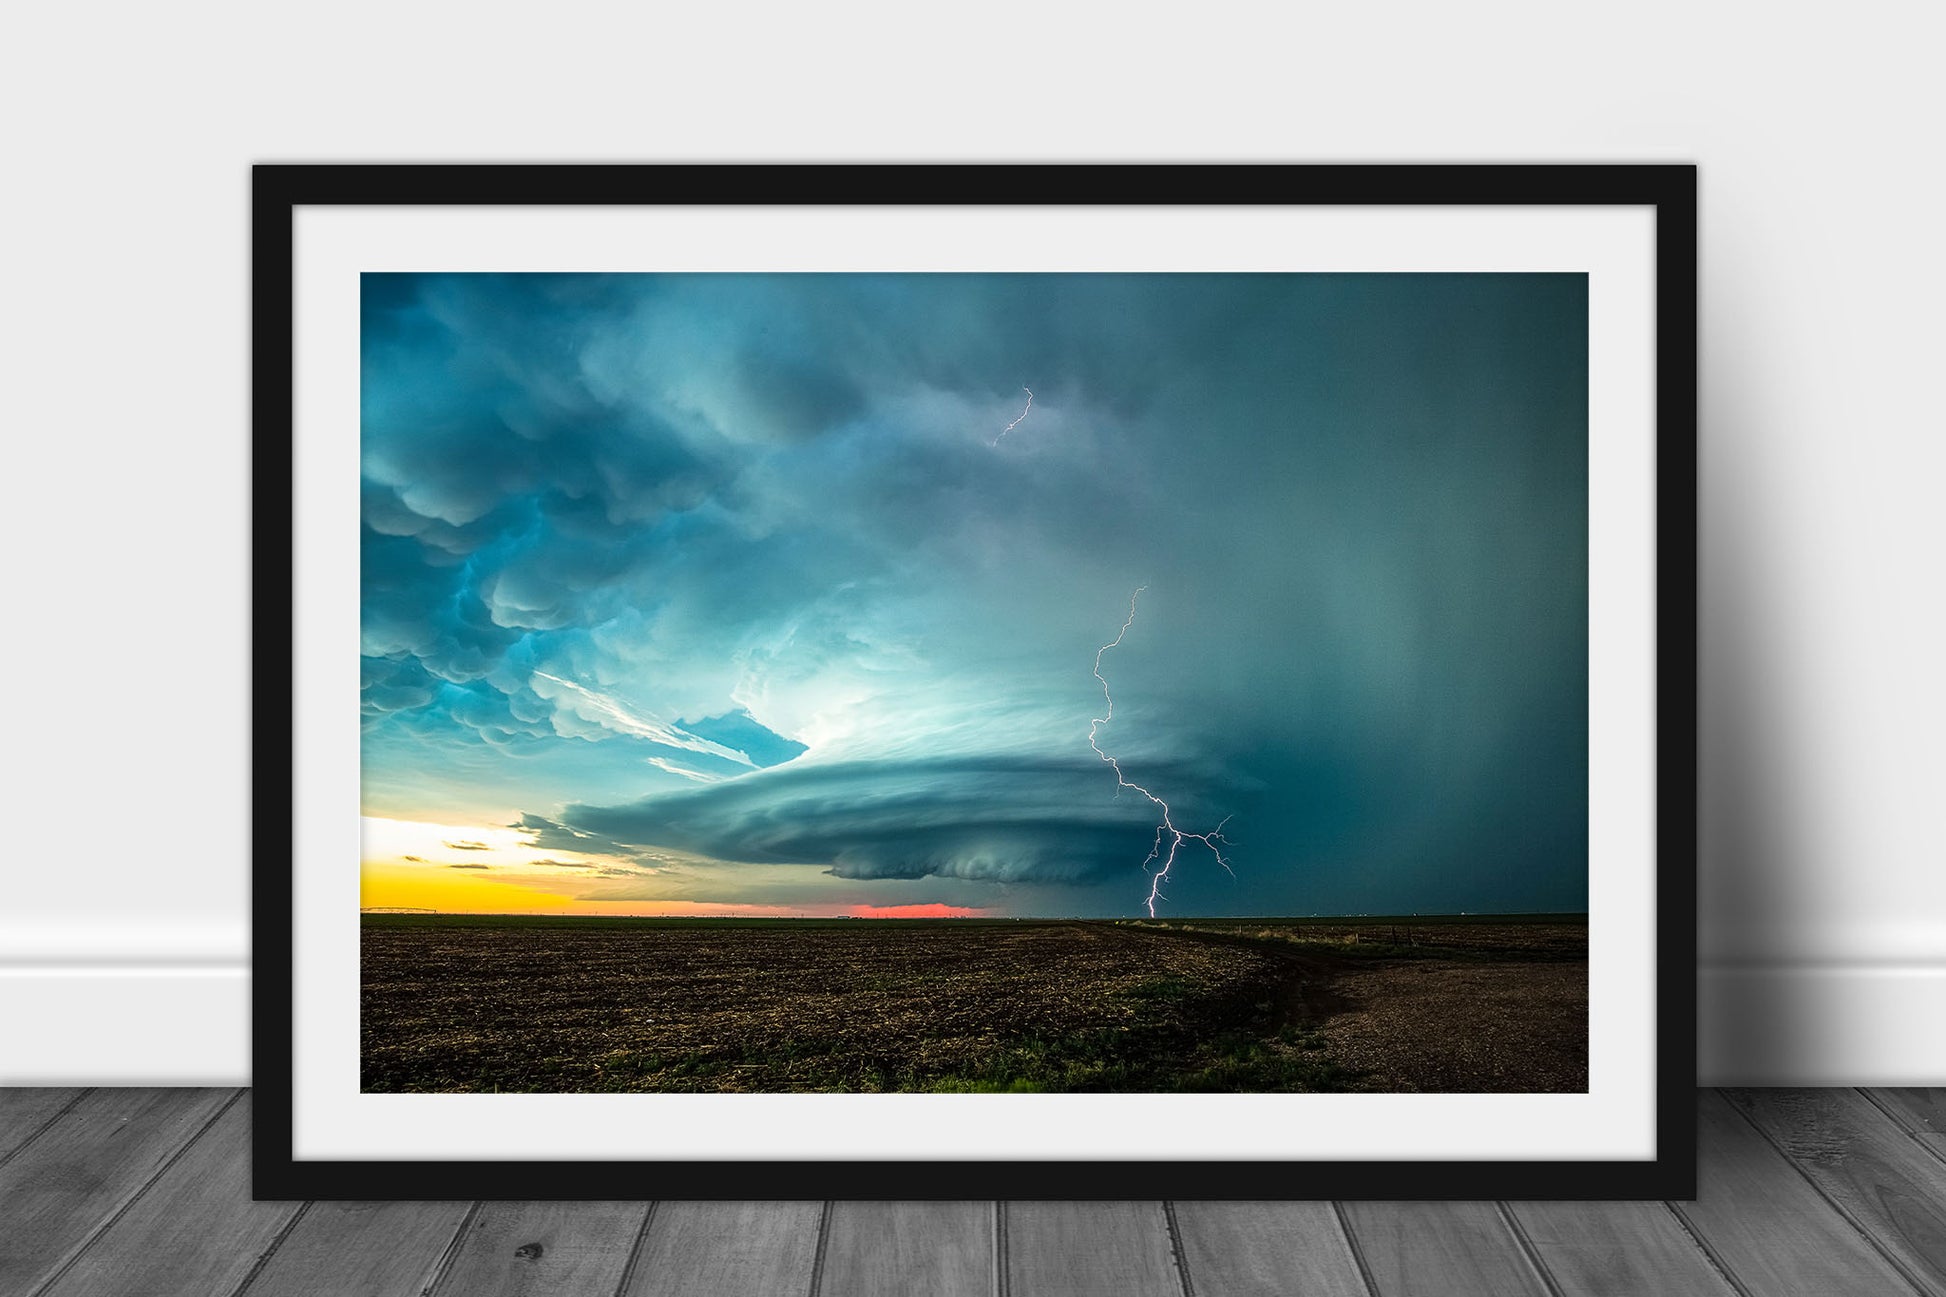 Framed and matted storm photography print of a supercell thunderstorm with lightning bolt over a field at sunset on the plains of Kansas by Sean Ramsey of Southern Plains Photography.